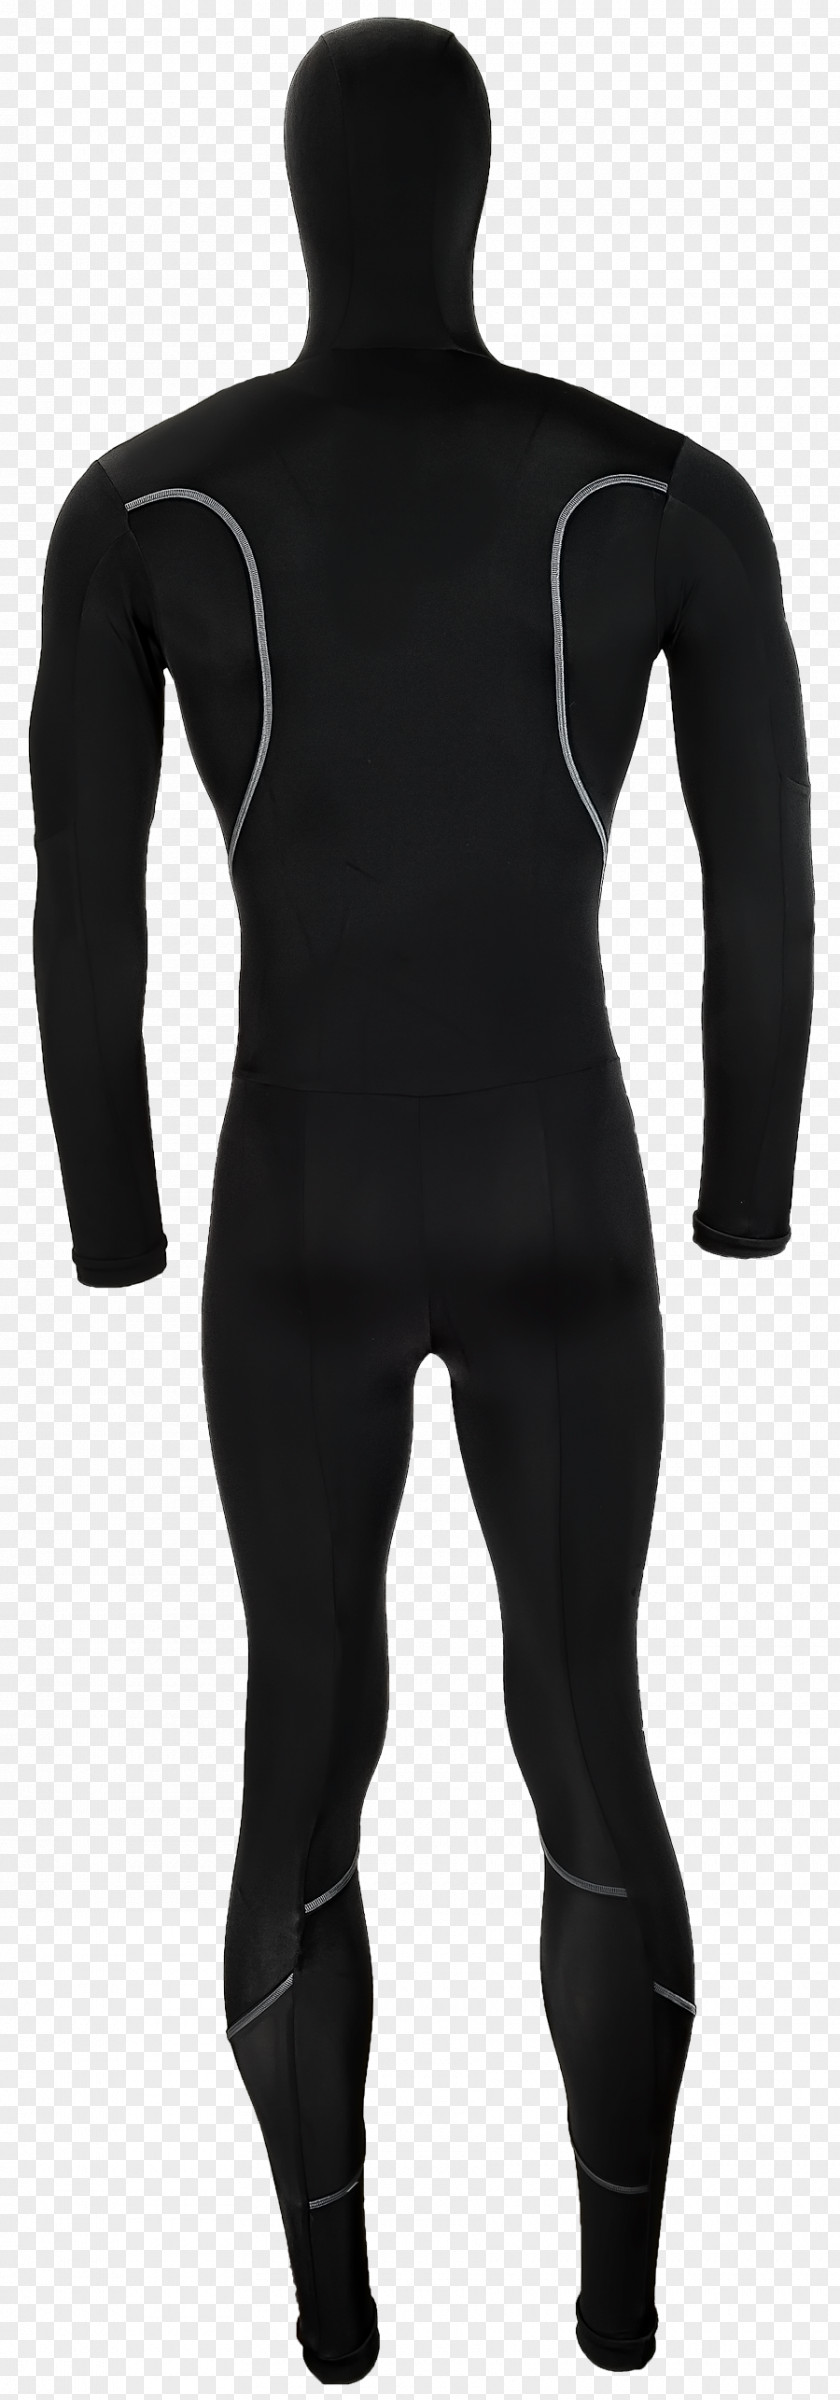 Zipper Wetsuit Hood Dry Suit Personal Protective Equipment PNG